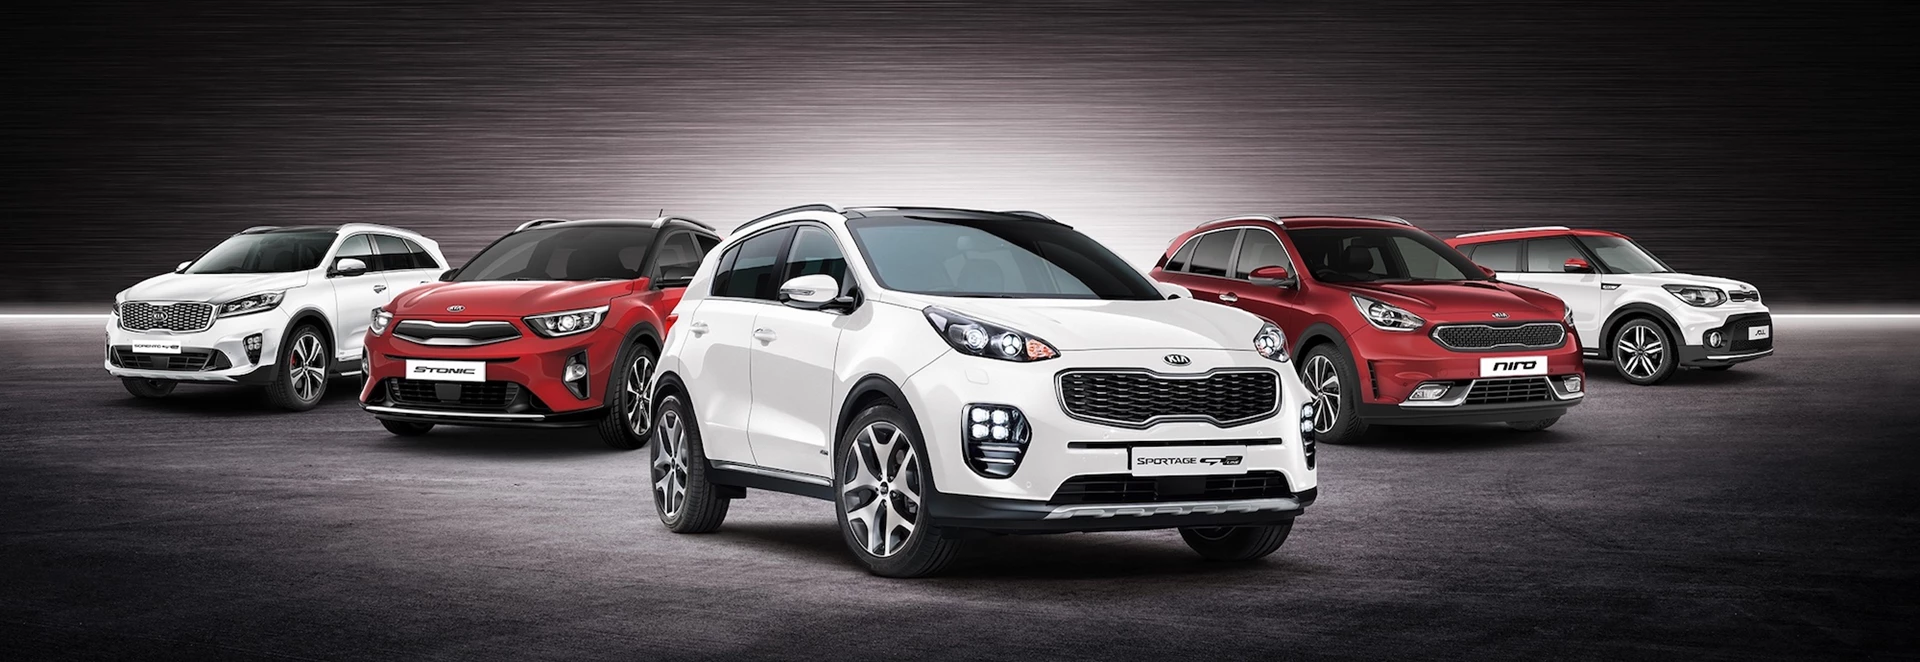 Kia rings in new year with SUV sales event